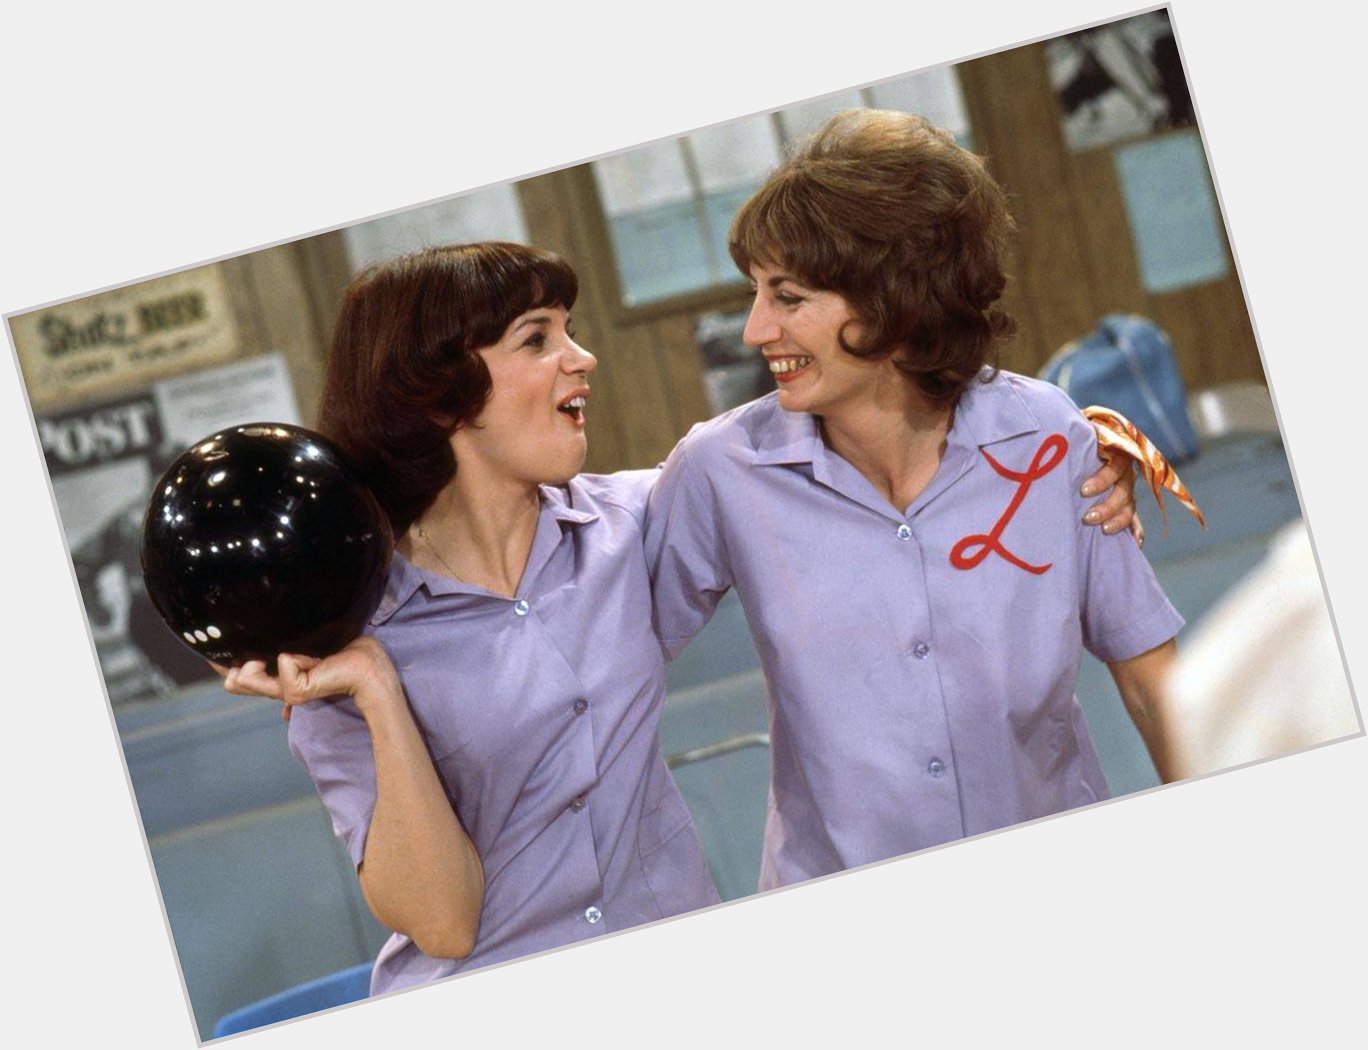 Happy bday Penny Marshall! Name the classic TV show she starred in (pictured)! 